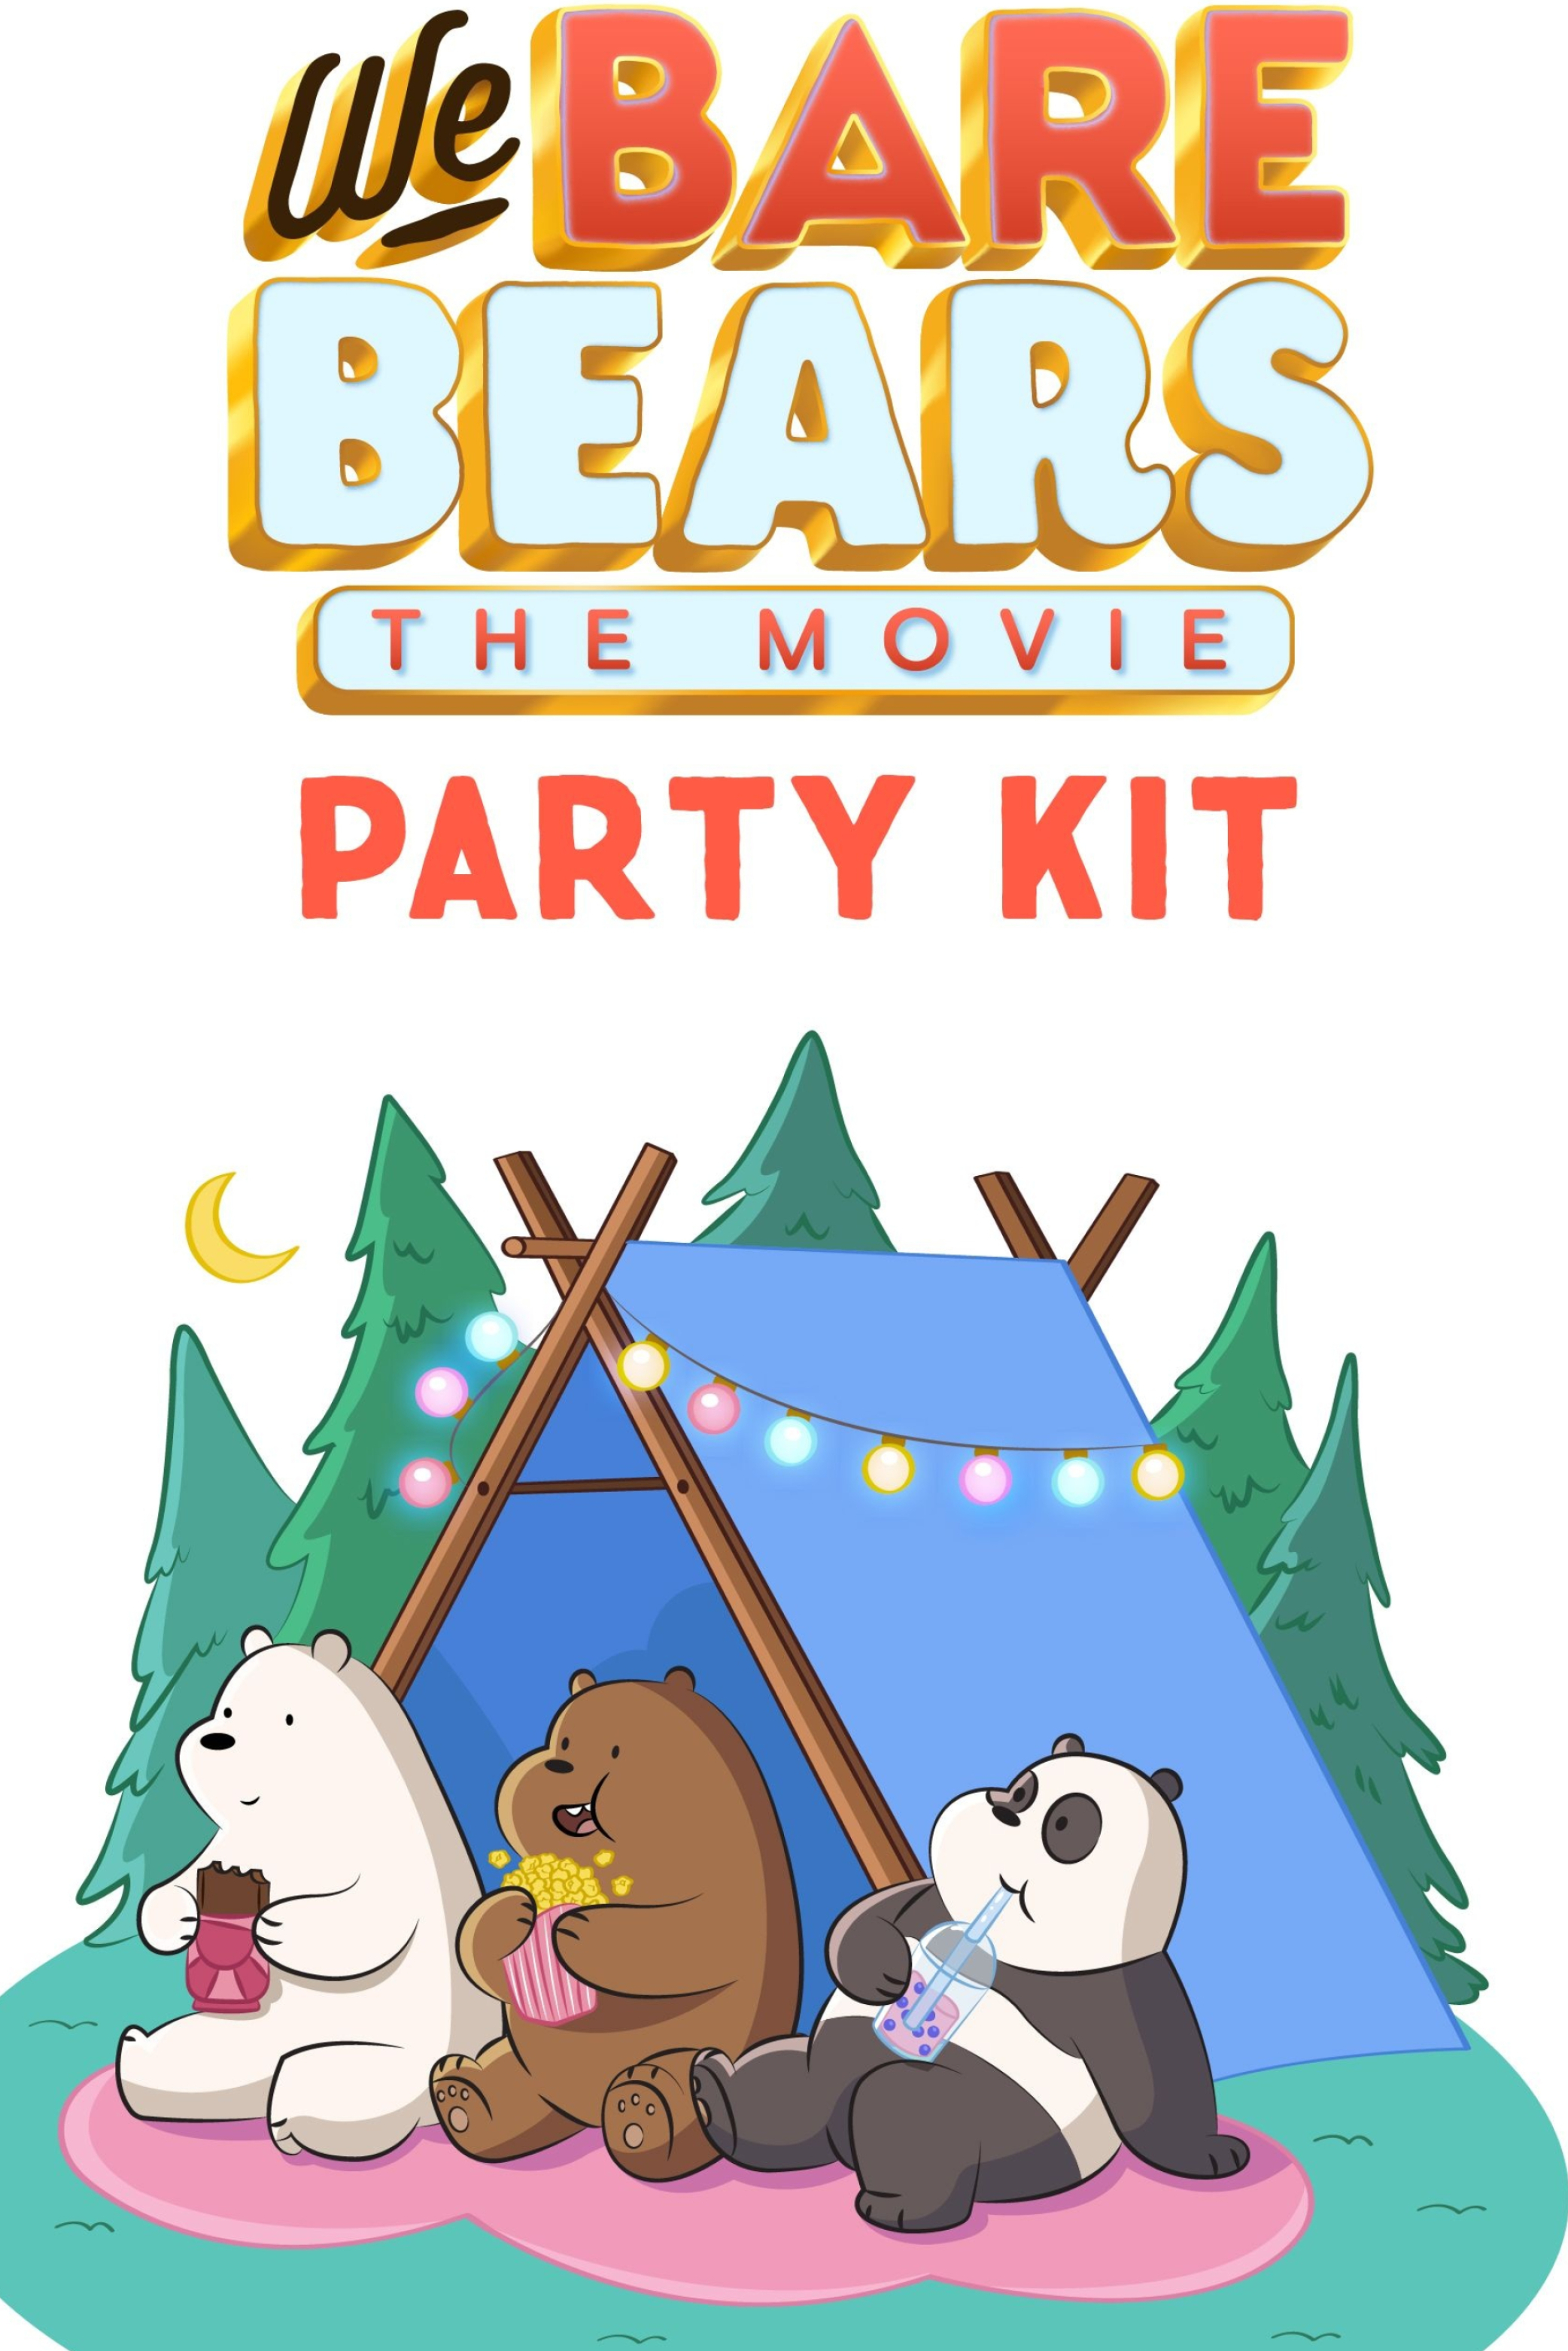 HD wallpaper, Iphone Hd We Bare Bears The Movie Wallpaper Image, Printable Party Kit, 2090X3130 Hd Phone, Animated Adventure, Fun Filled